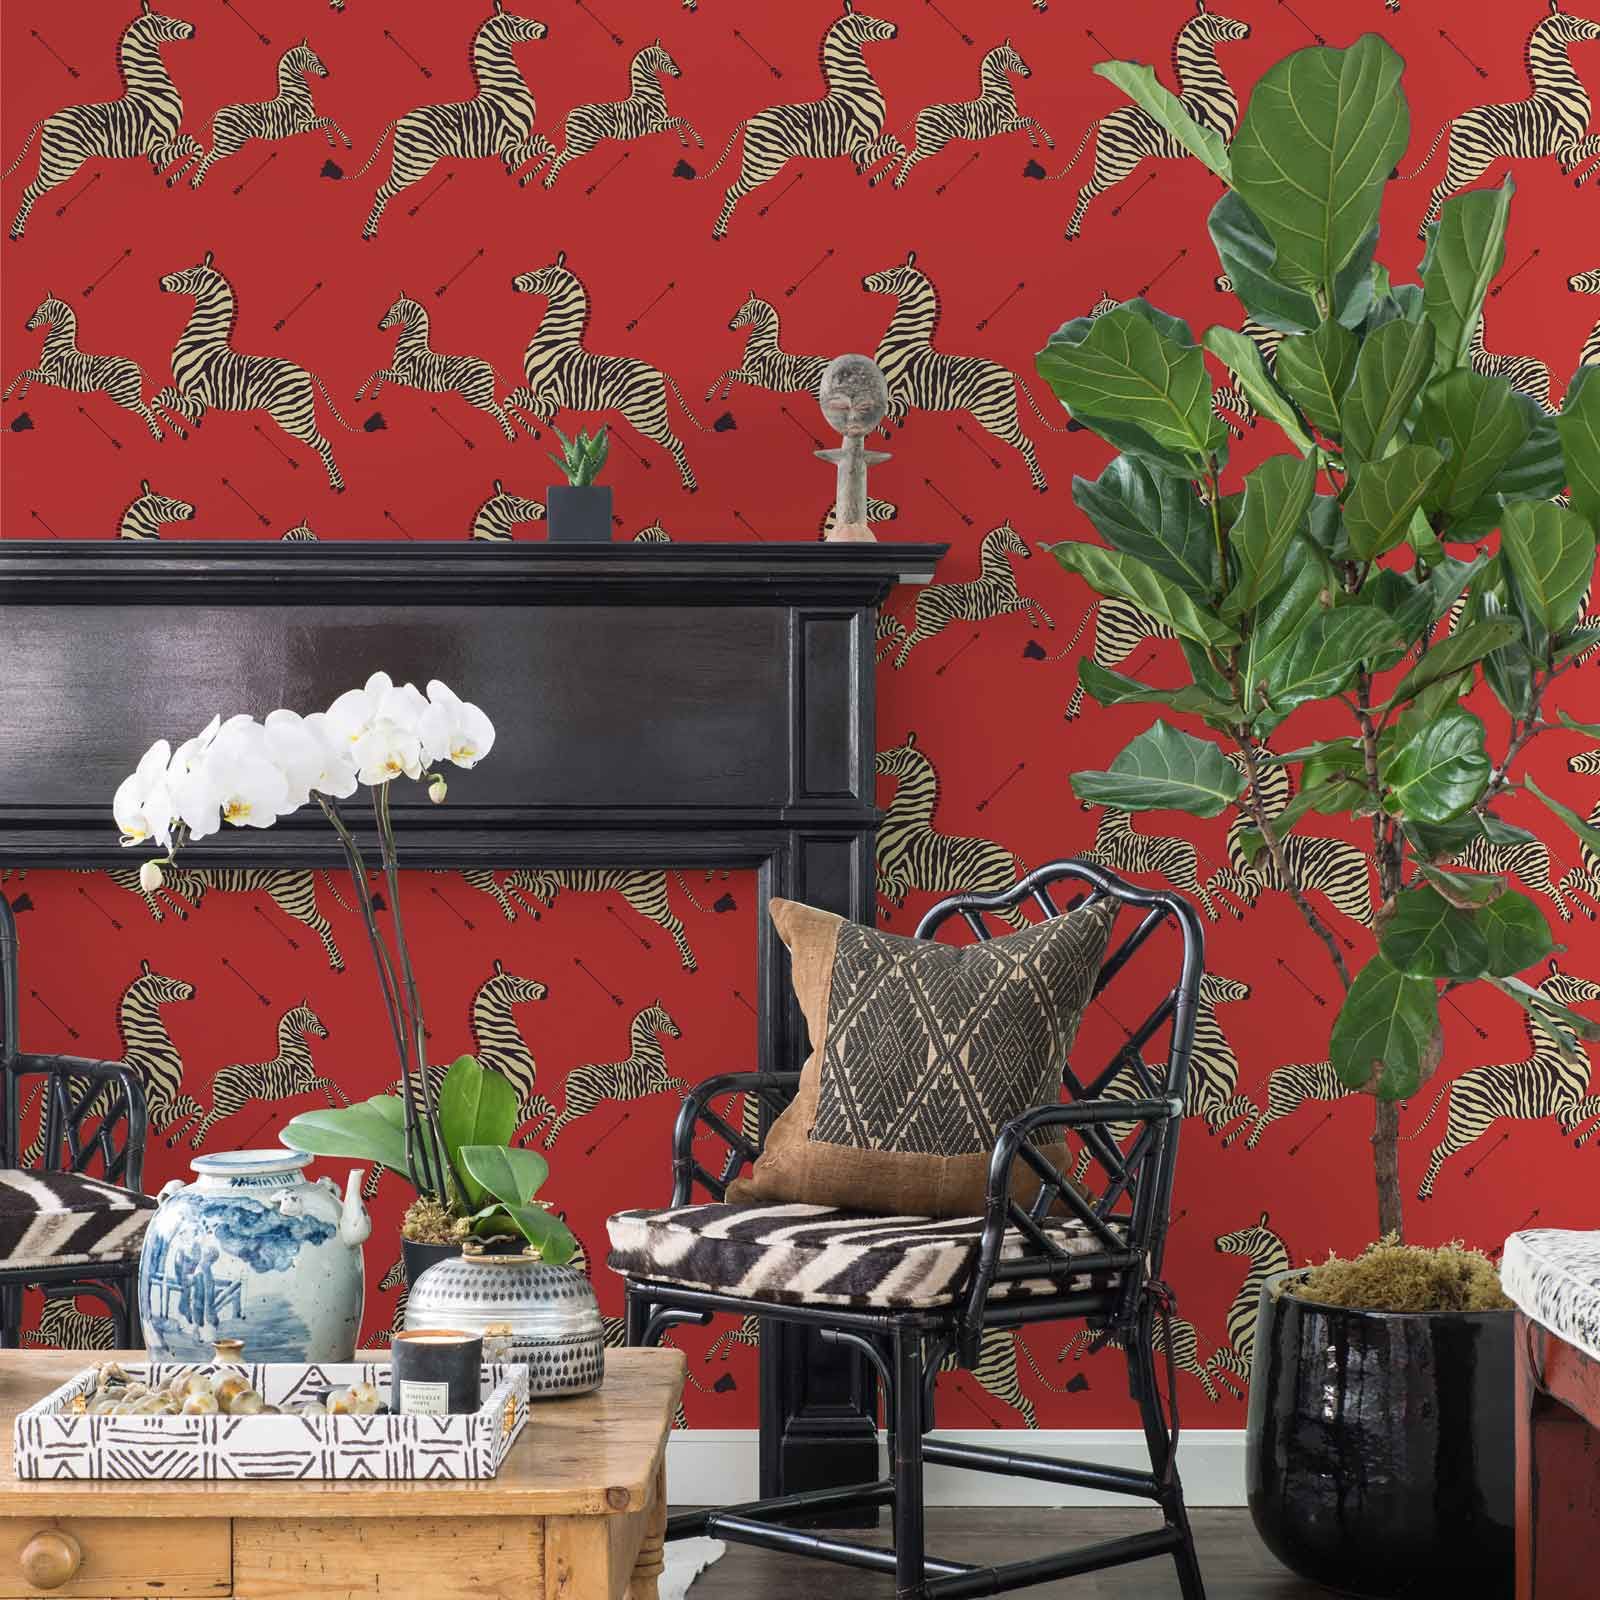 Iconic Scalamandré Wallpapers Now Come in Peel and Stick